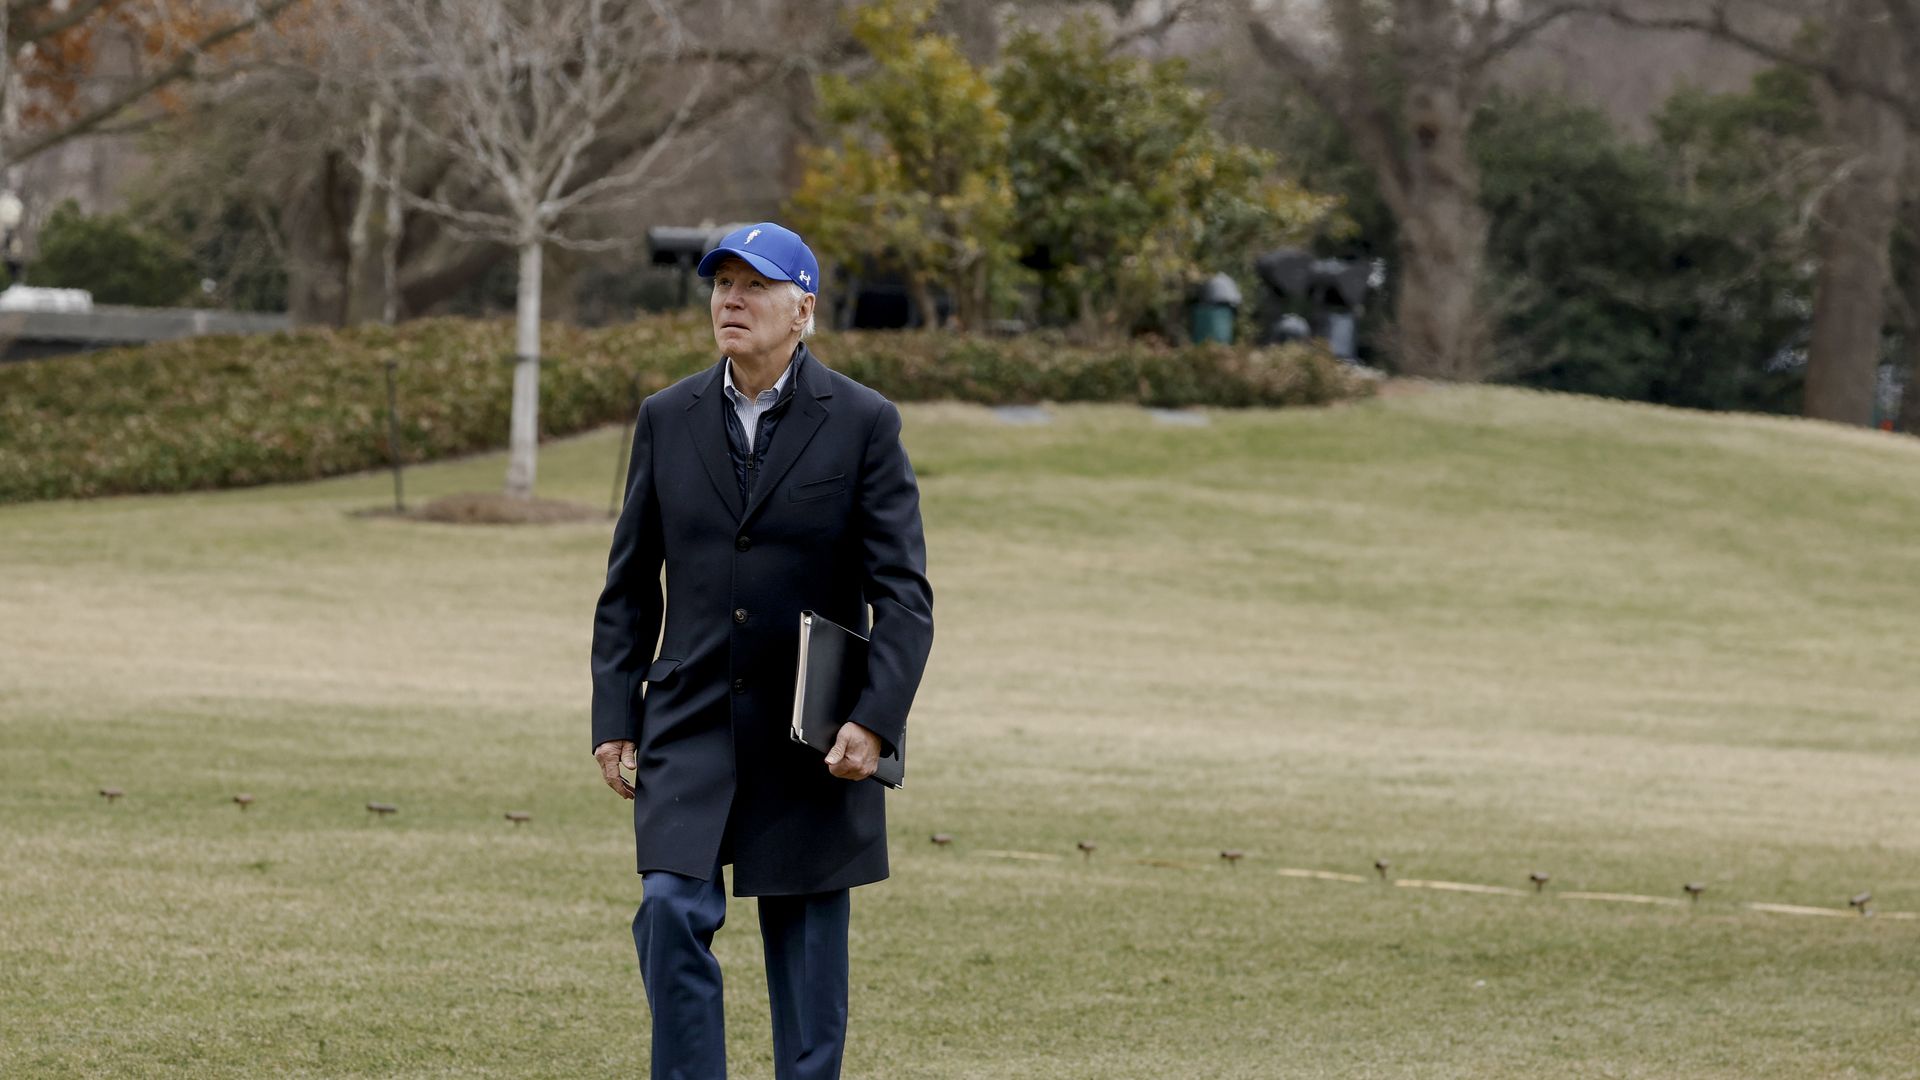 Joe Biden walks in winter grass on the White House south lawn, looking up the sky in his blue baseball cap